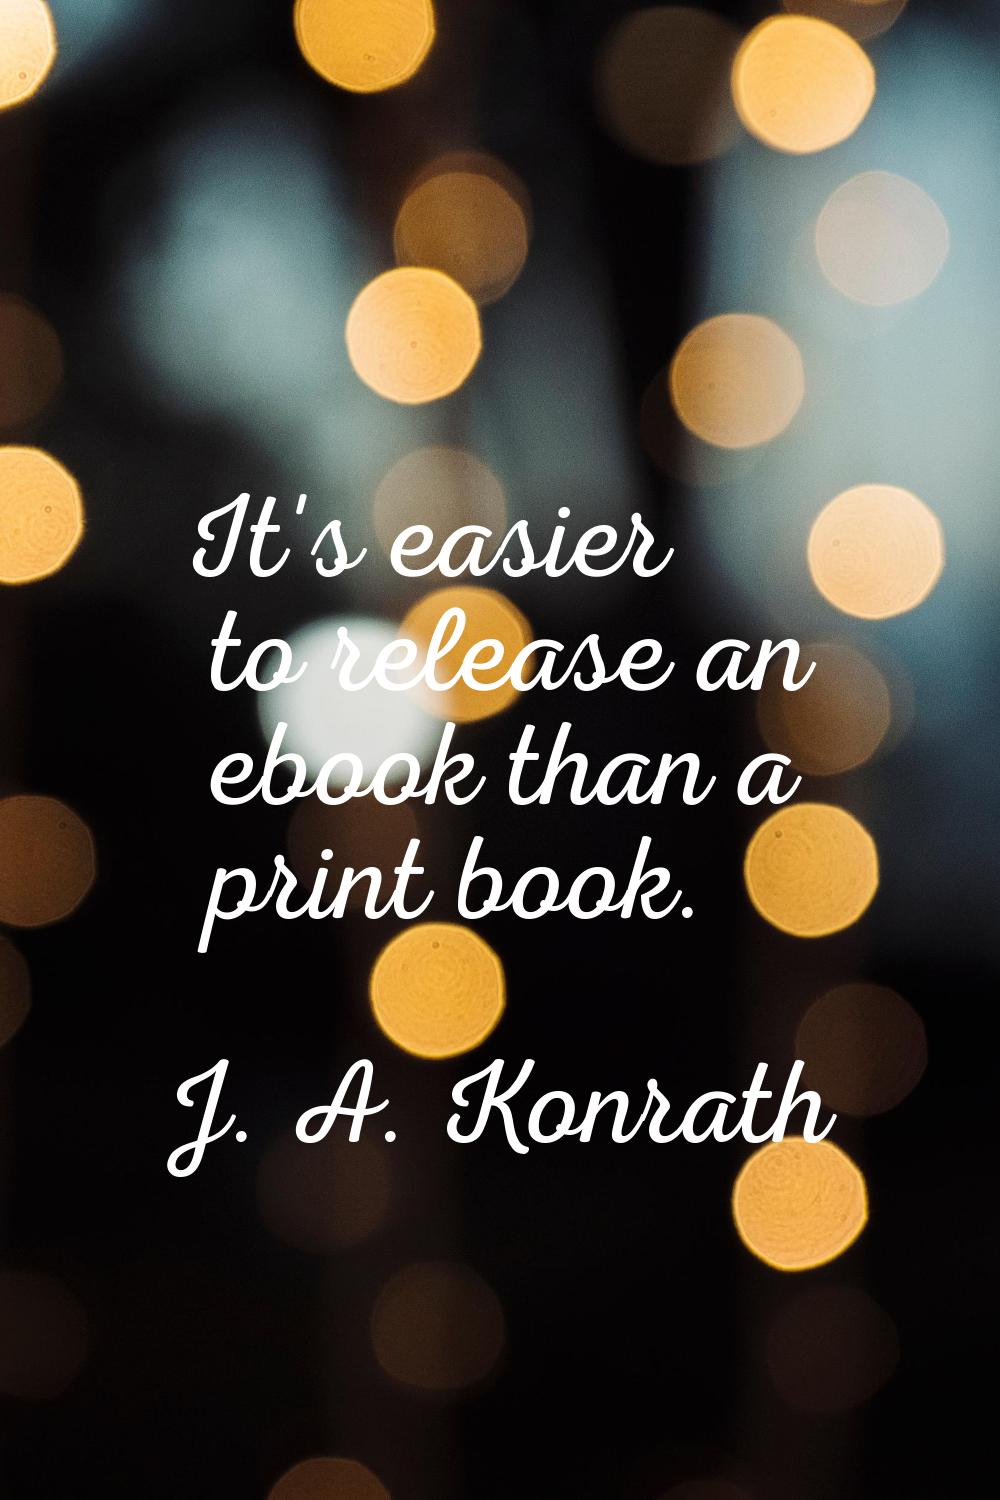 It's easier to release an ebook than a print book.